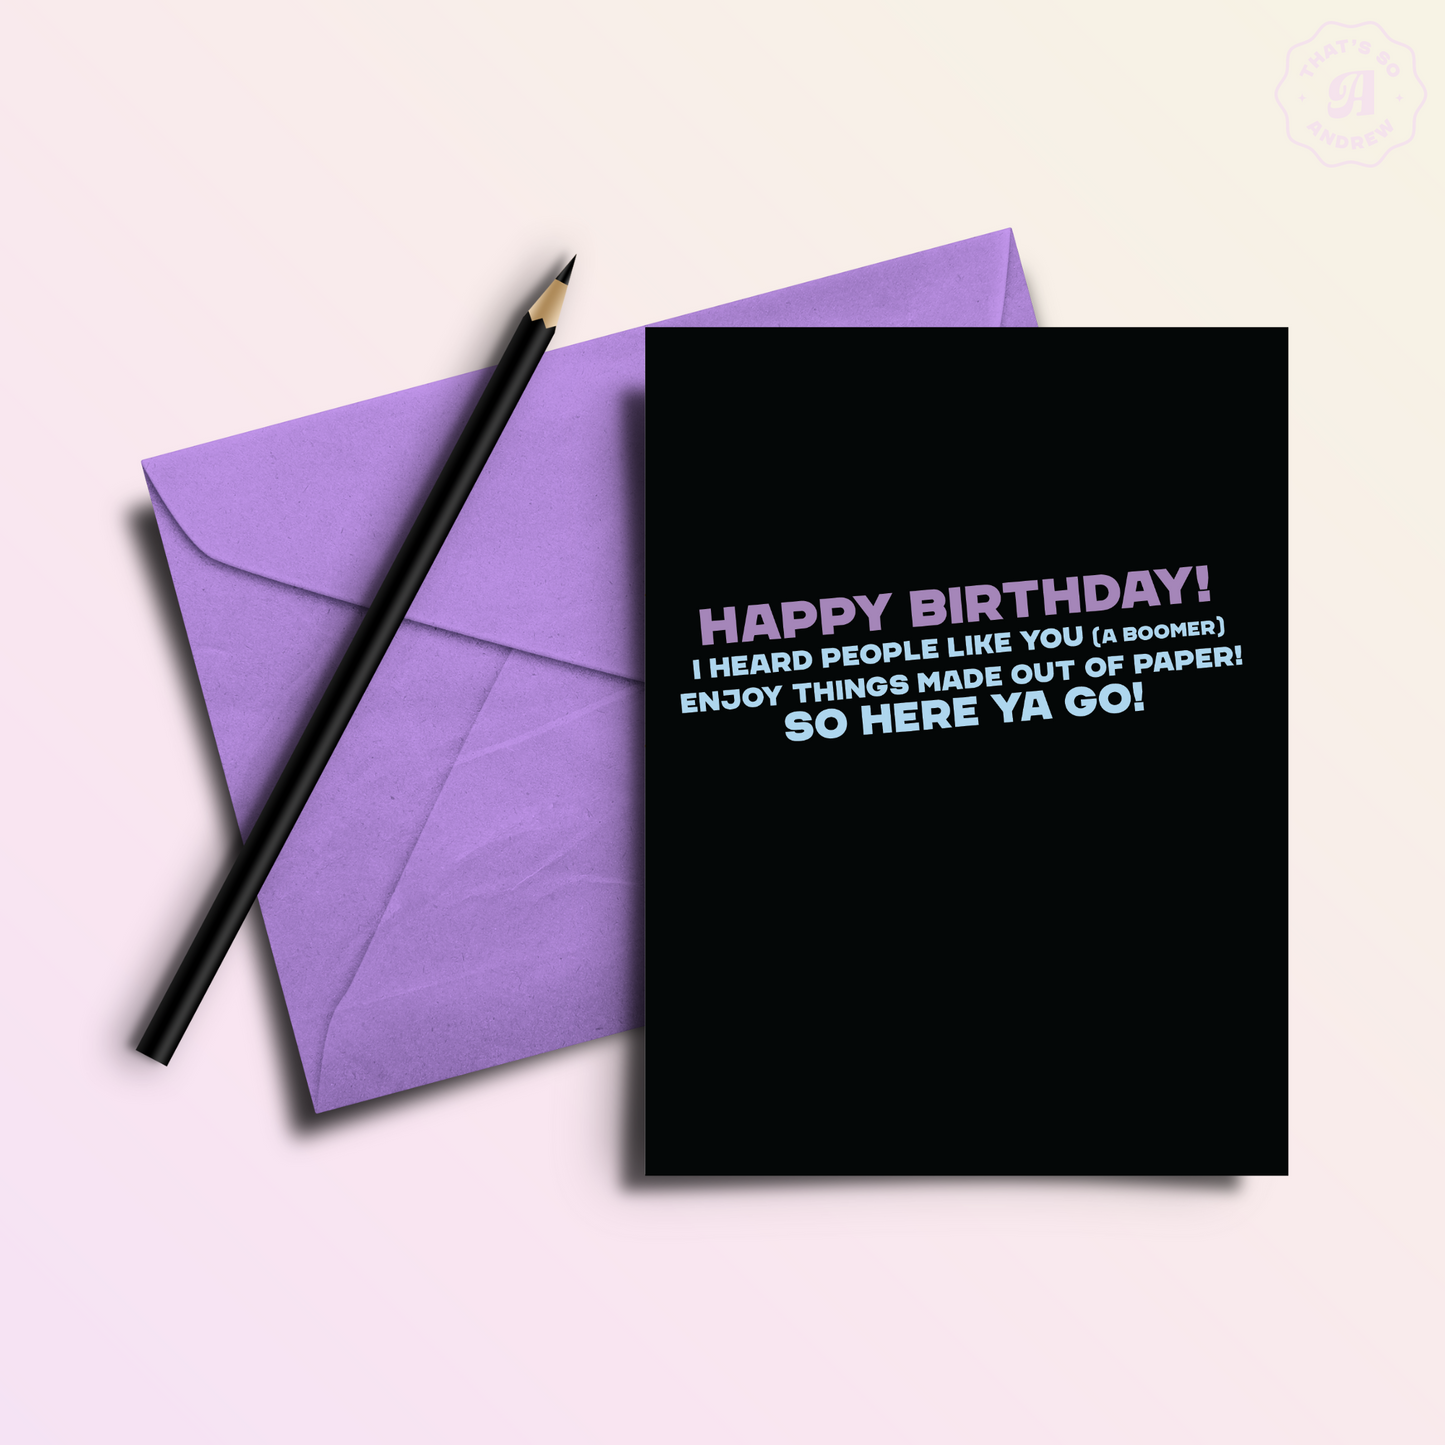 Boomer Likes Paper | Funny Birthday Greeting Card